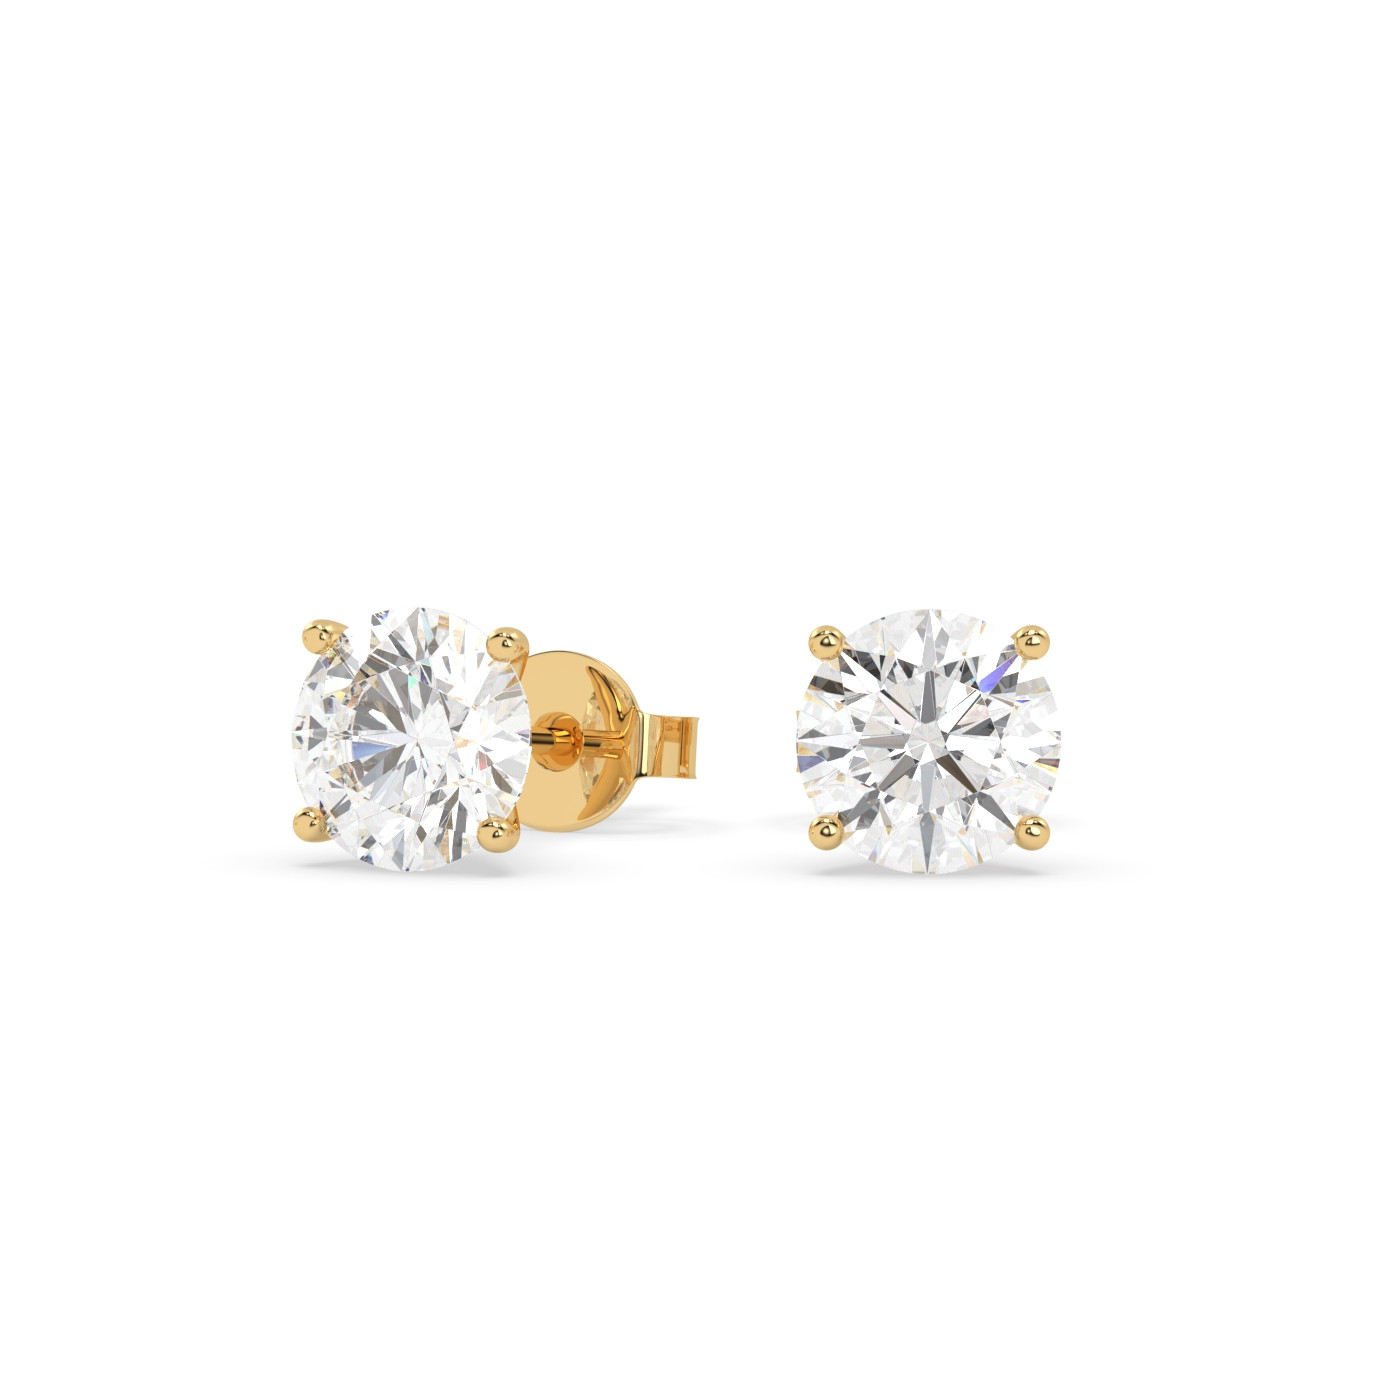 18k yellow gold  1.4 carat round stud earrings with butterfly back